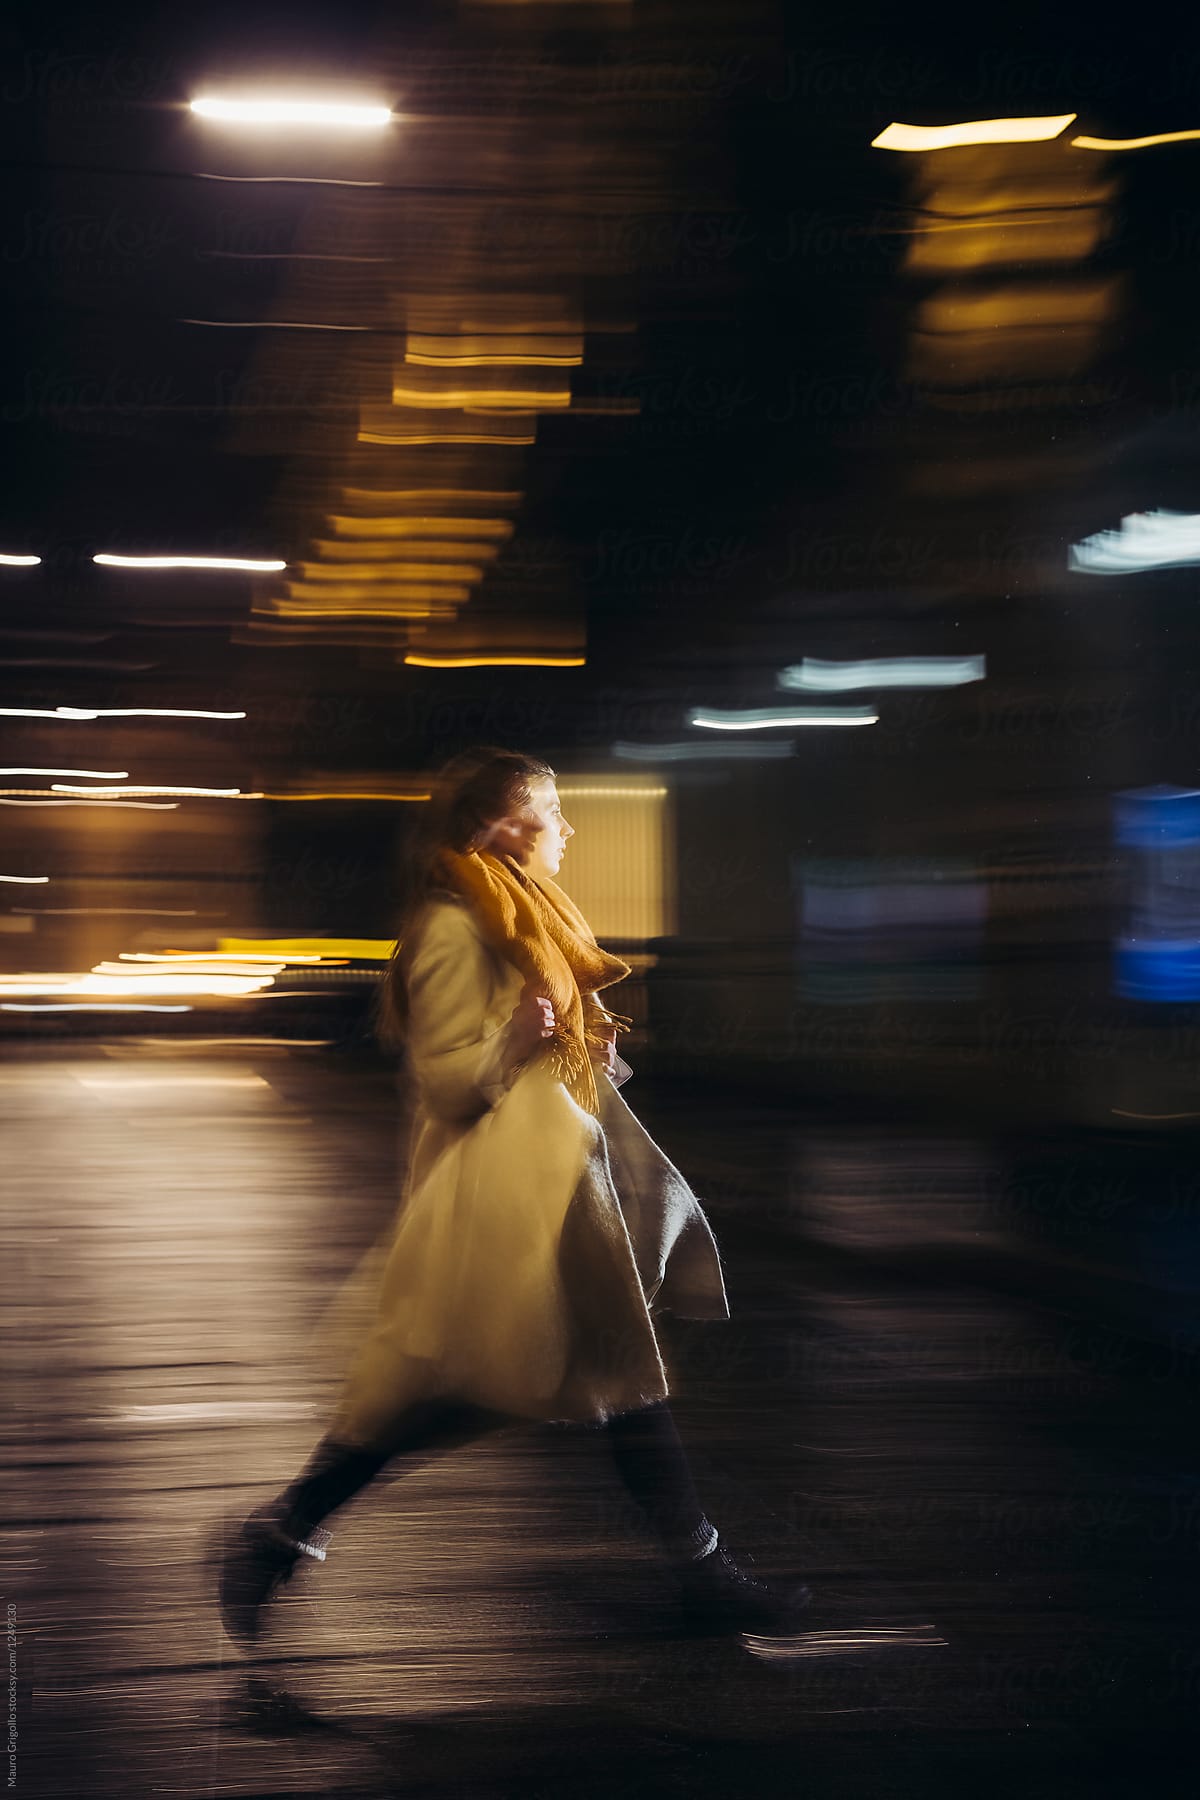 A lonely woman walks fast in the city at night